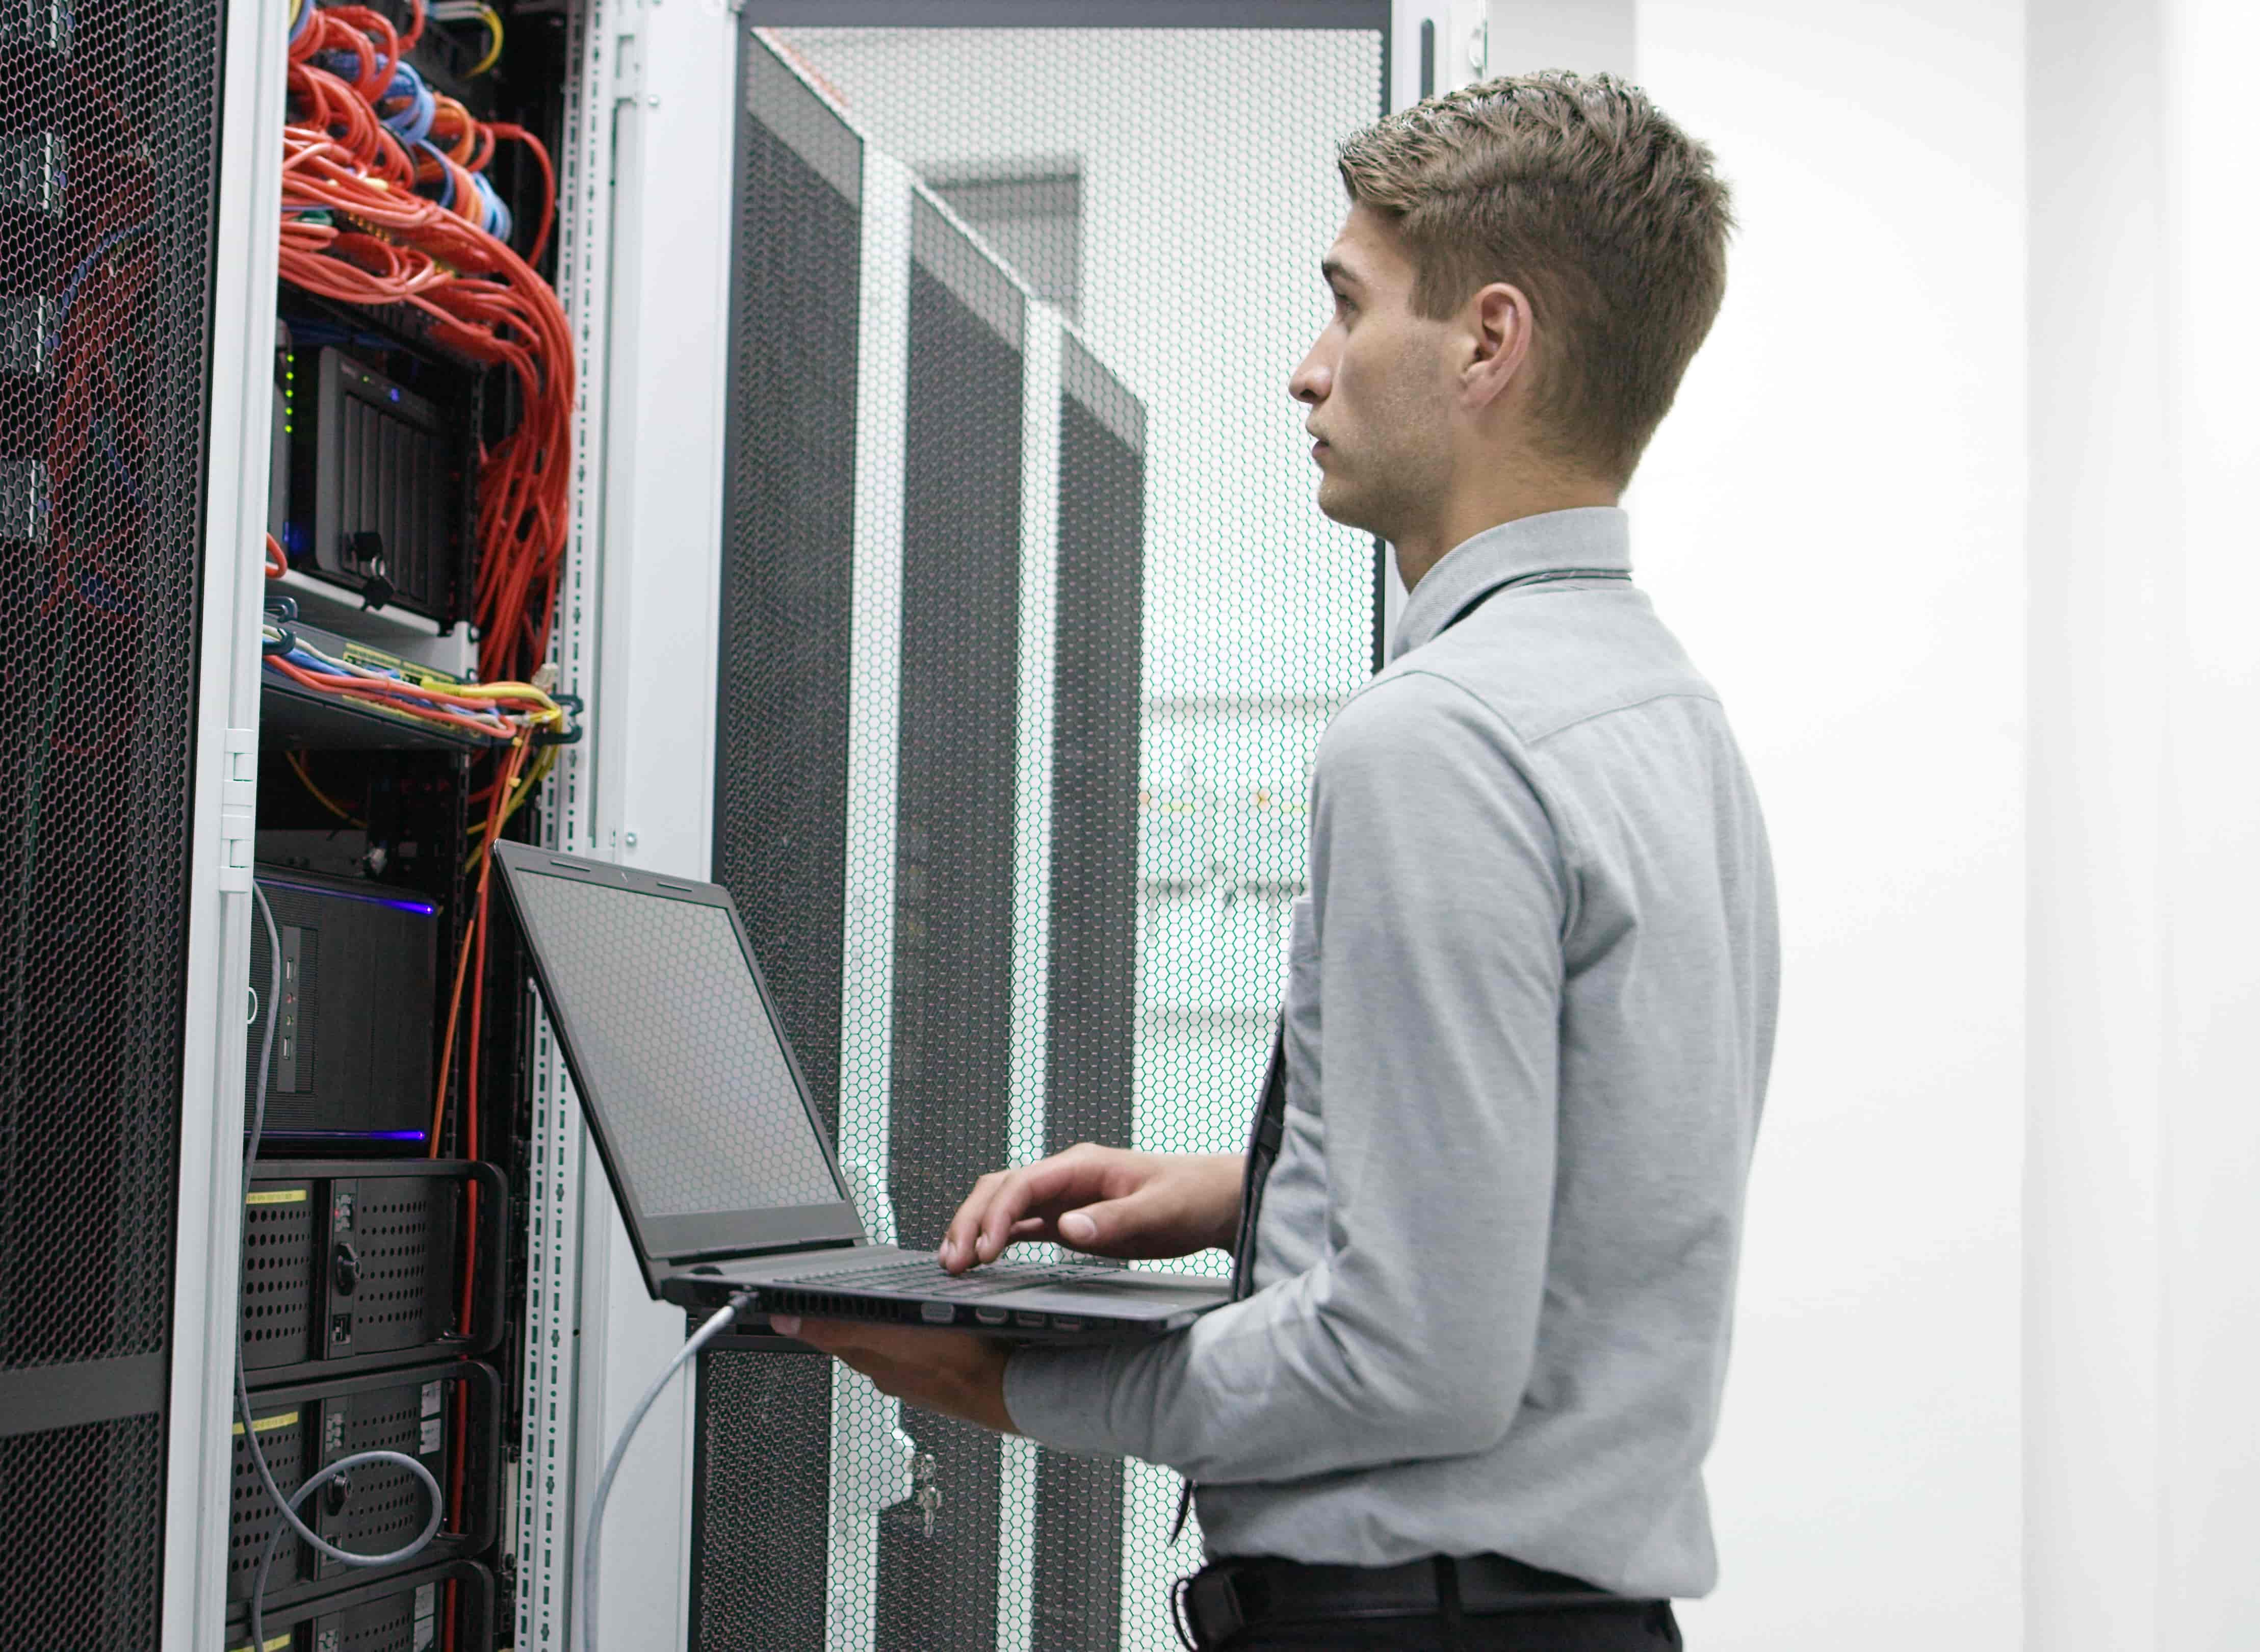 This is a photo of an engineer in front of an office server rack.